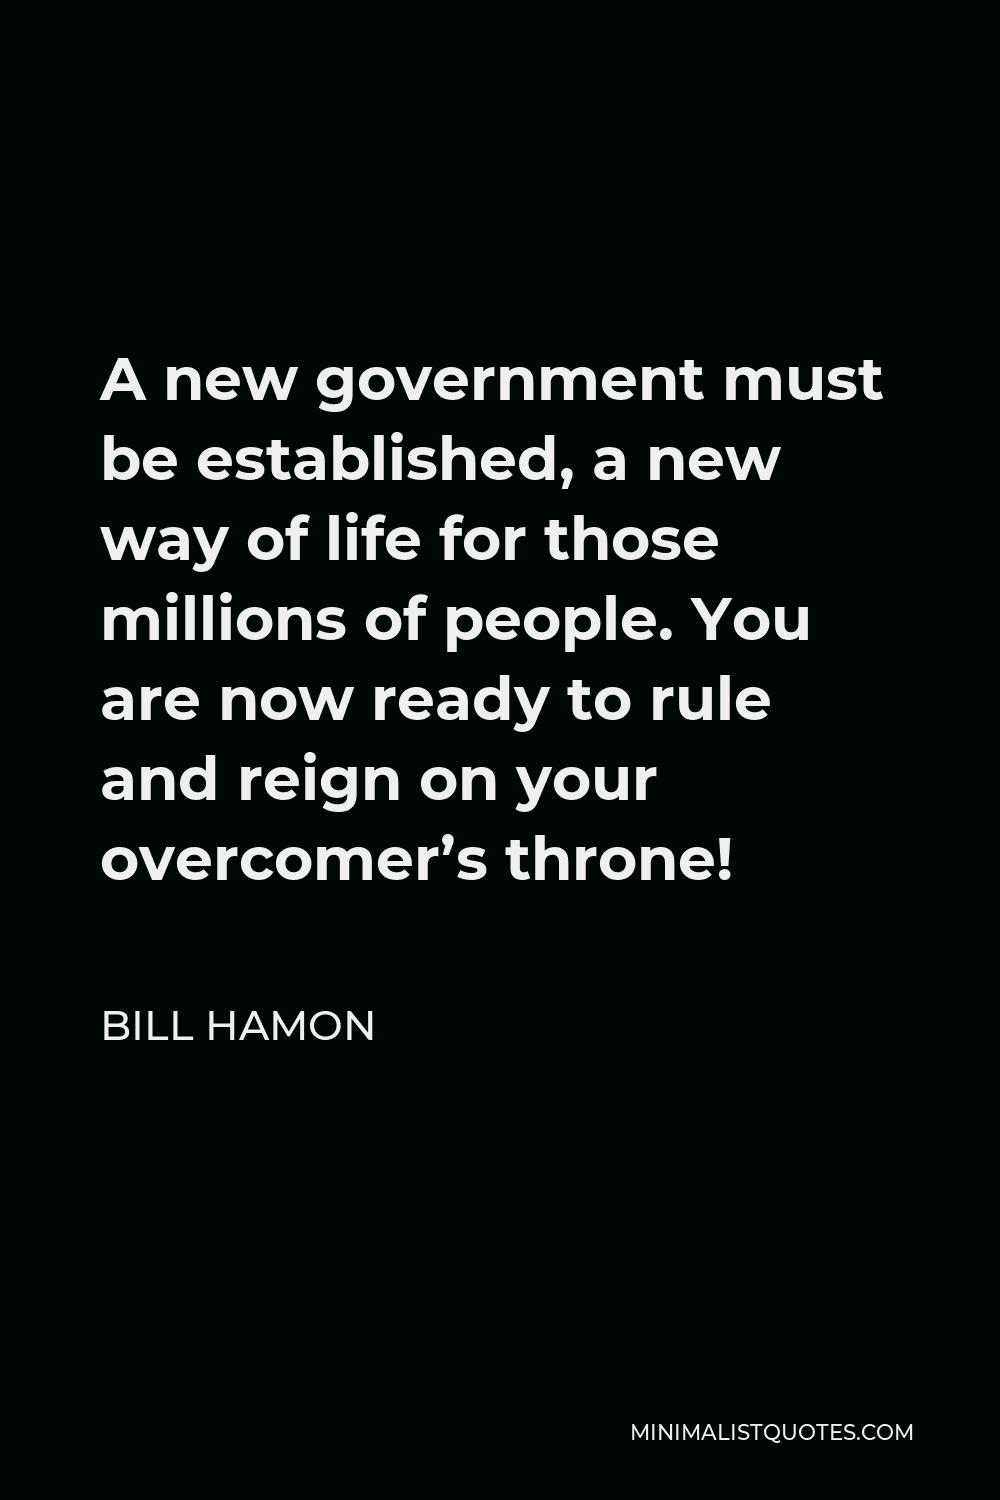 Bill Hamon Quote - A new government must be established, a new way of life for those millions of people. You are now ready to rule and reign on your overcomer’s throne!